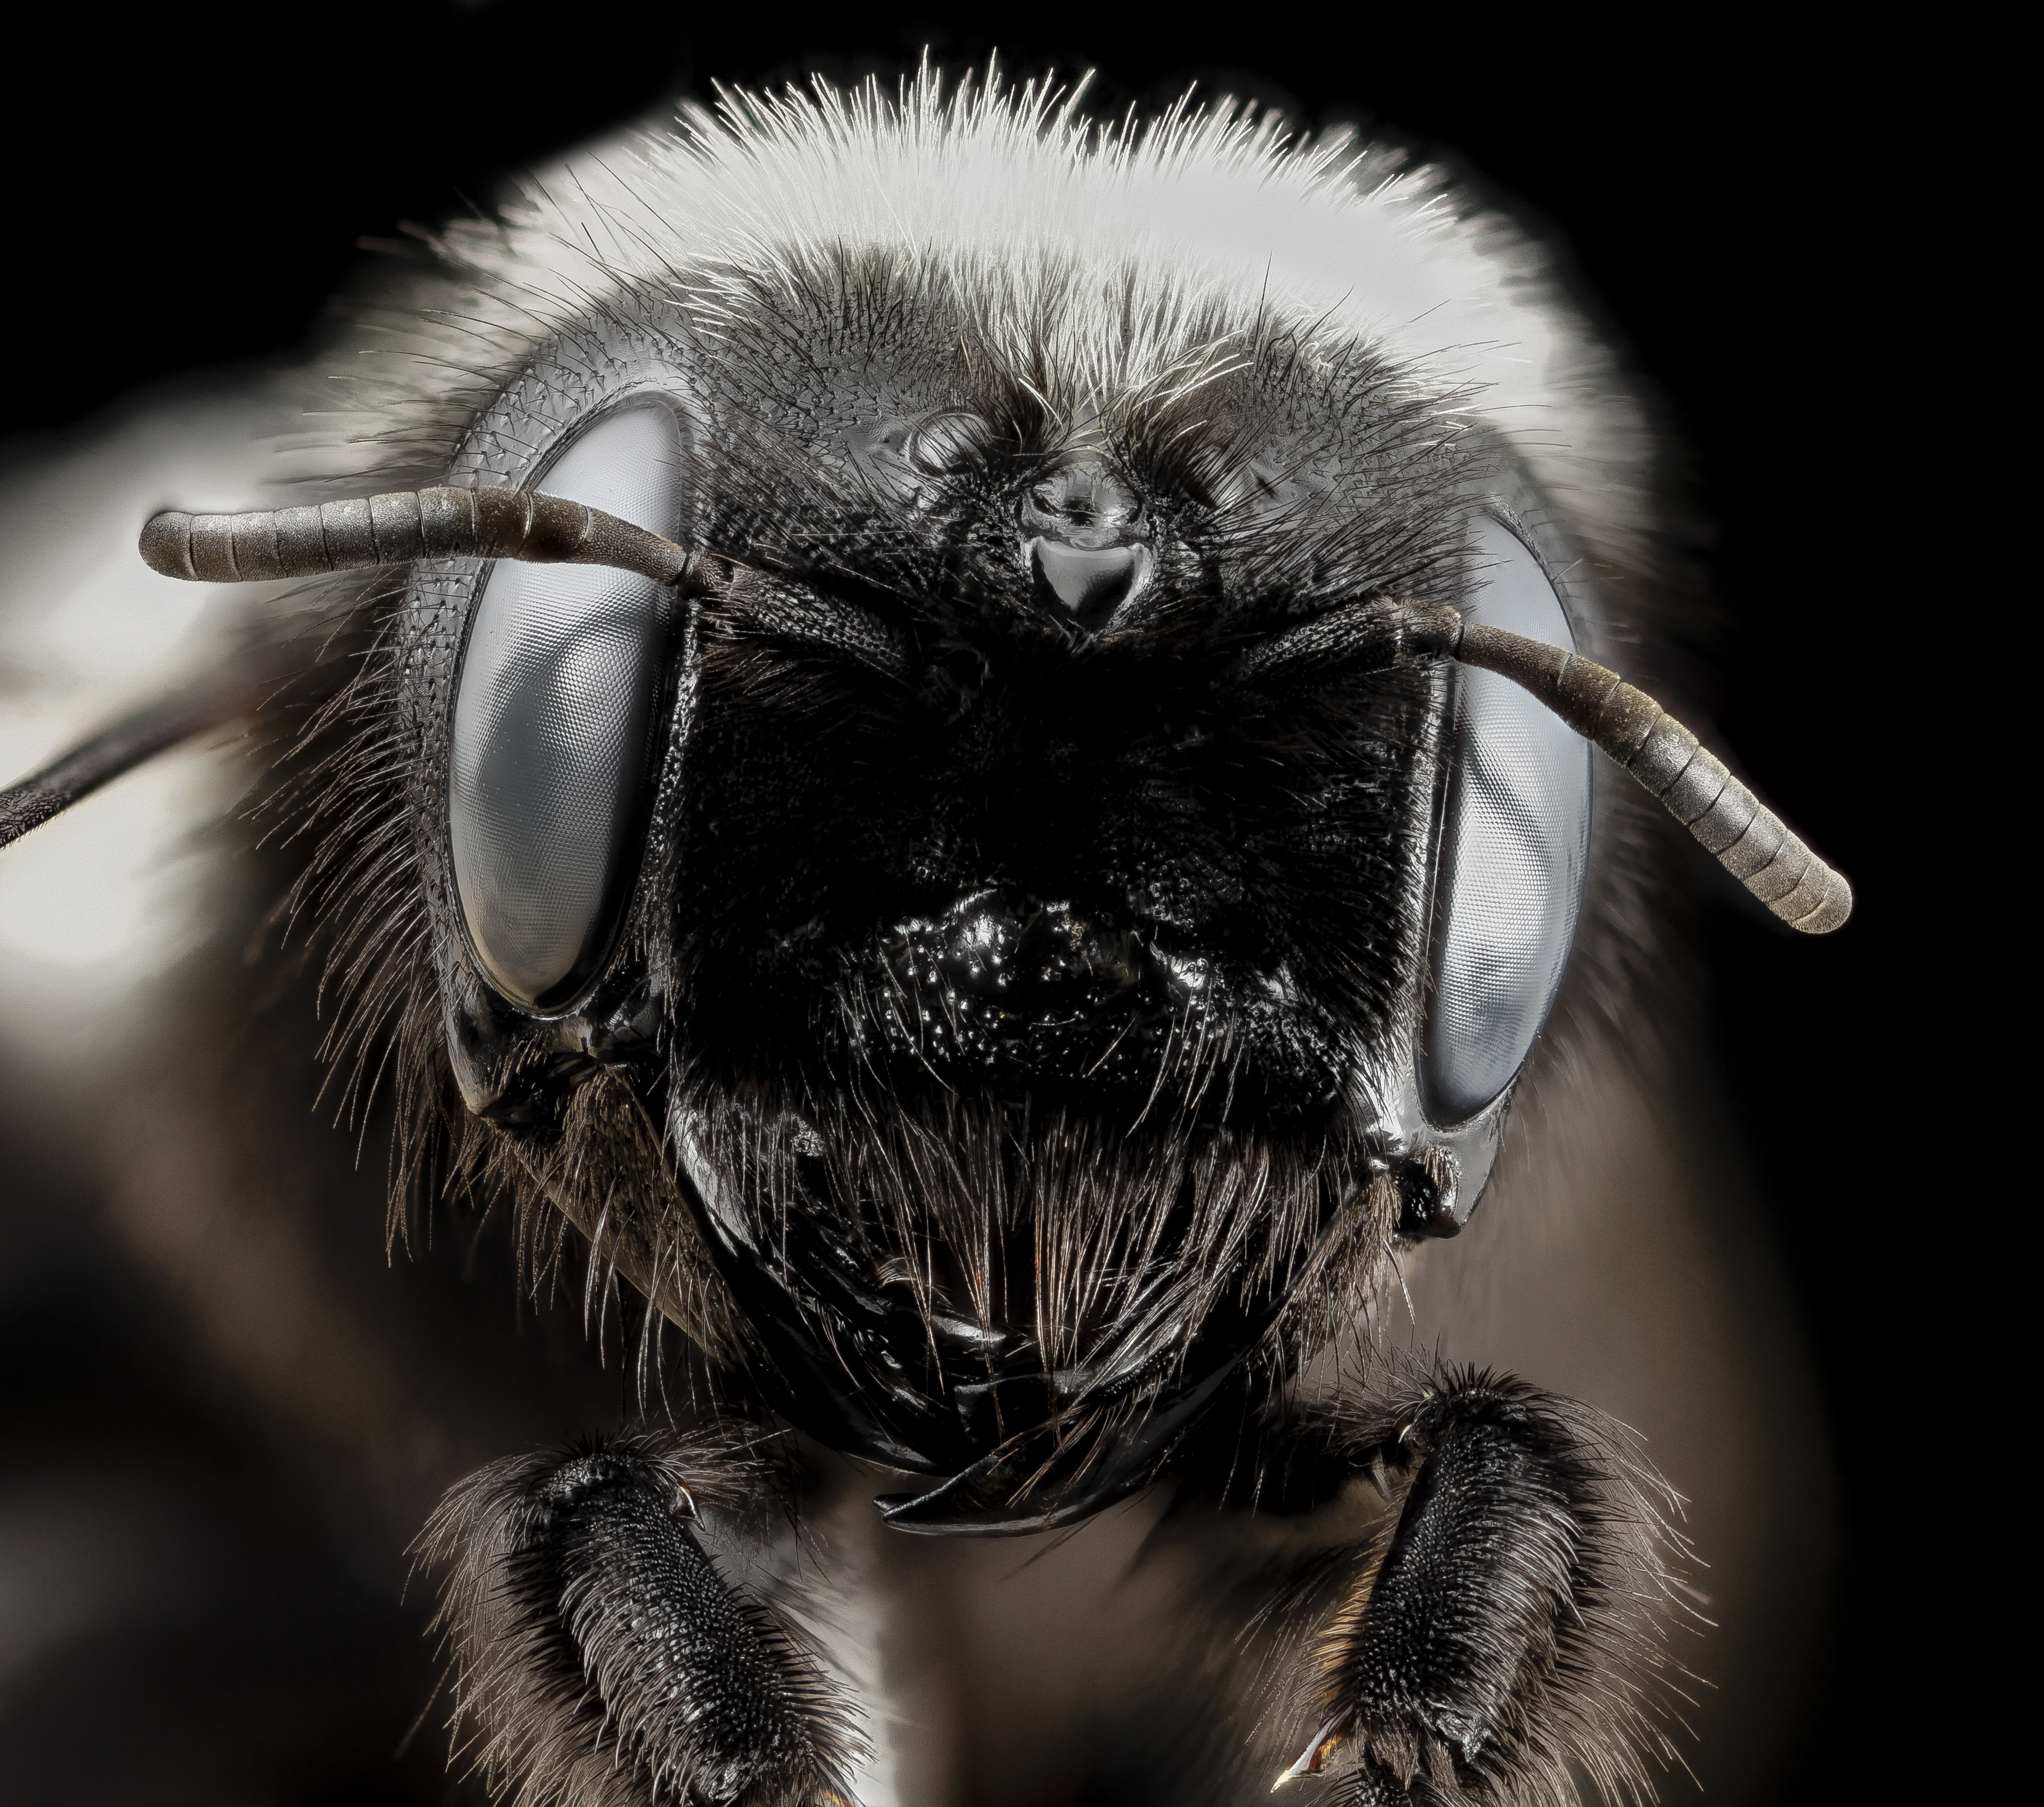 Washed Megachile, f, face, chile 2014-08-06-10.34.14 ZS PMax (14977843152)